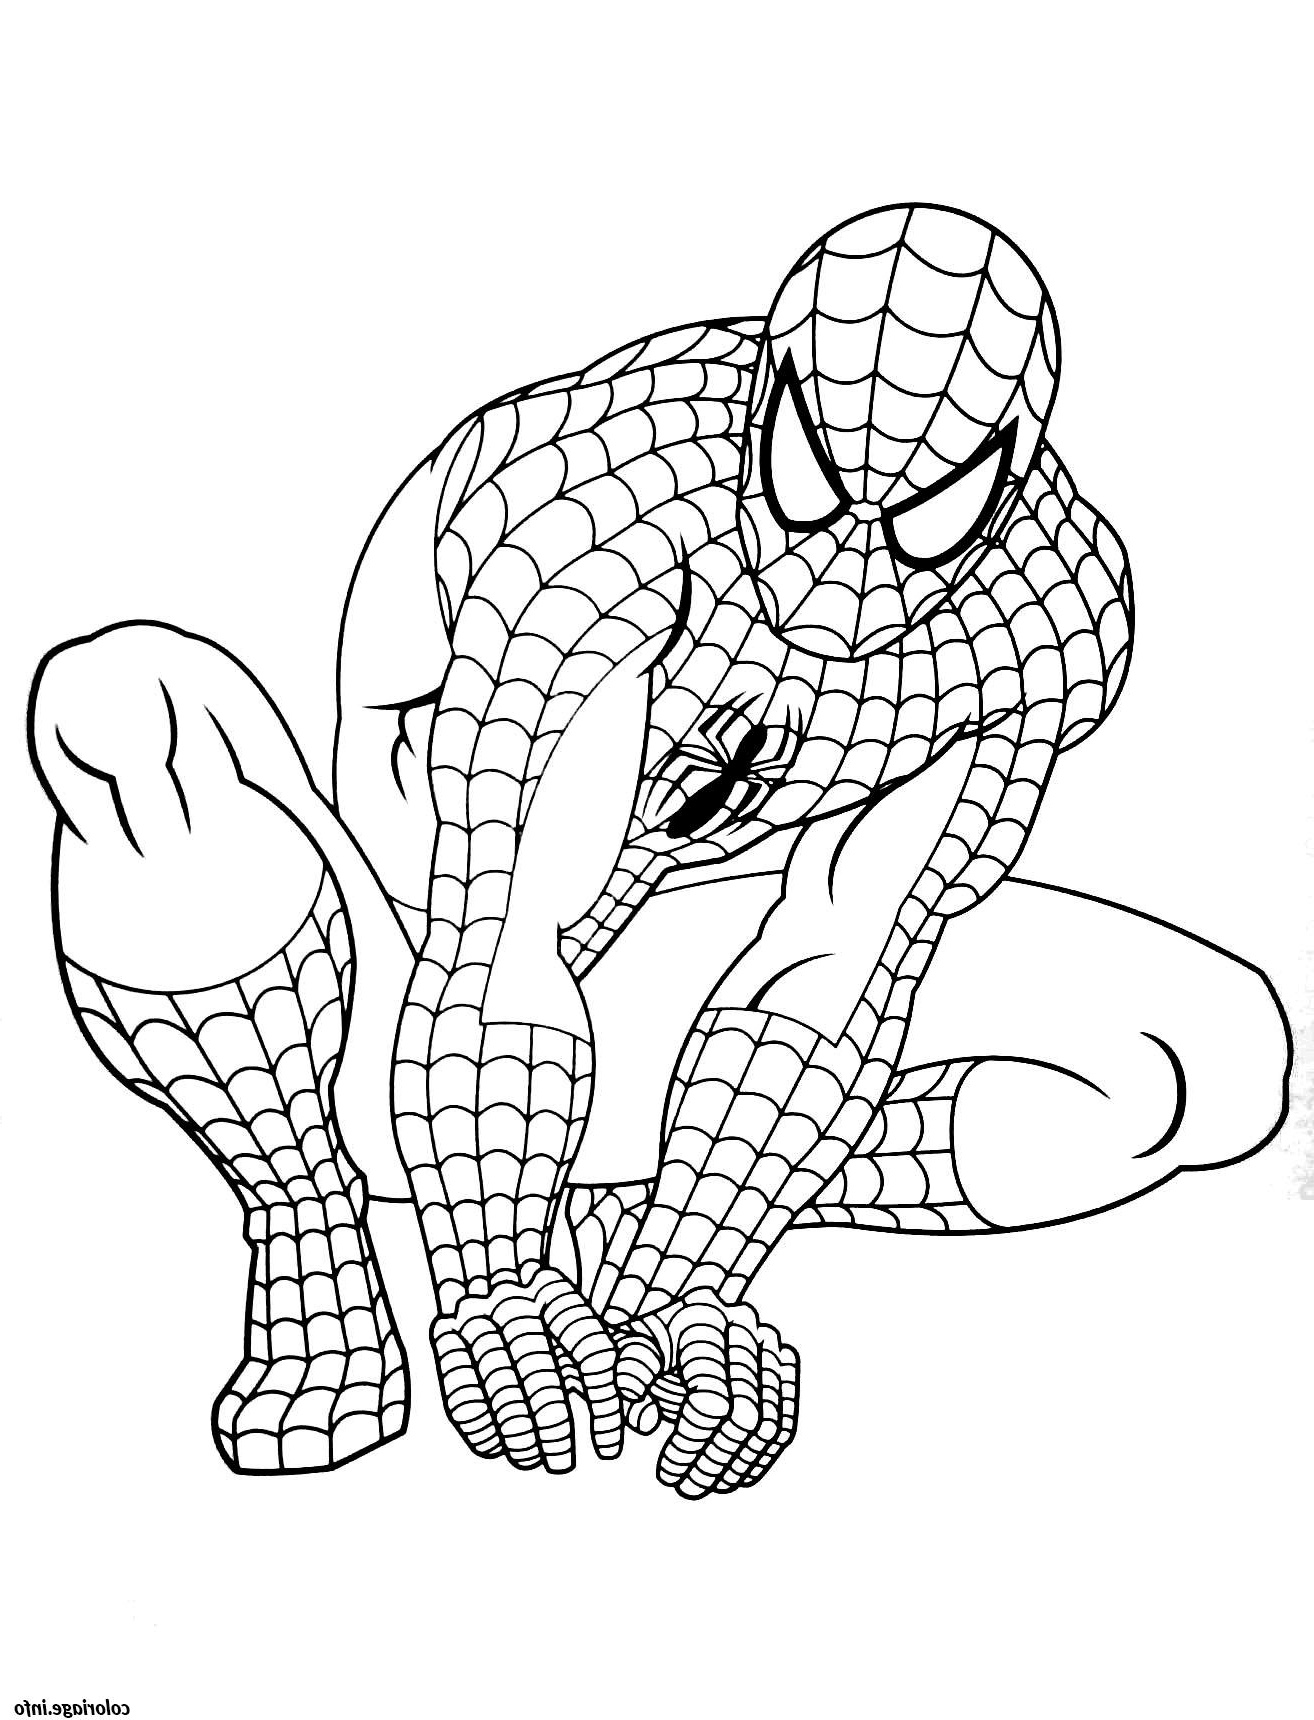 Coloriages Spiderman Luxe Images Coloriage Spiderman 9 Jecolorie